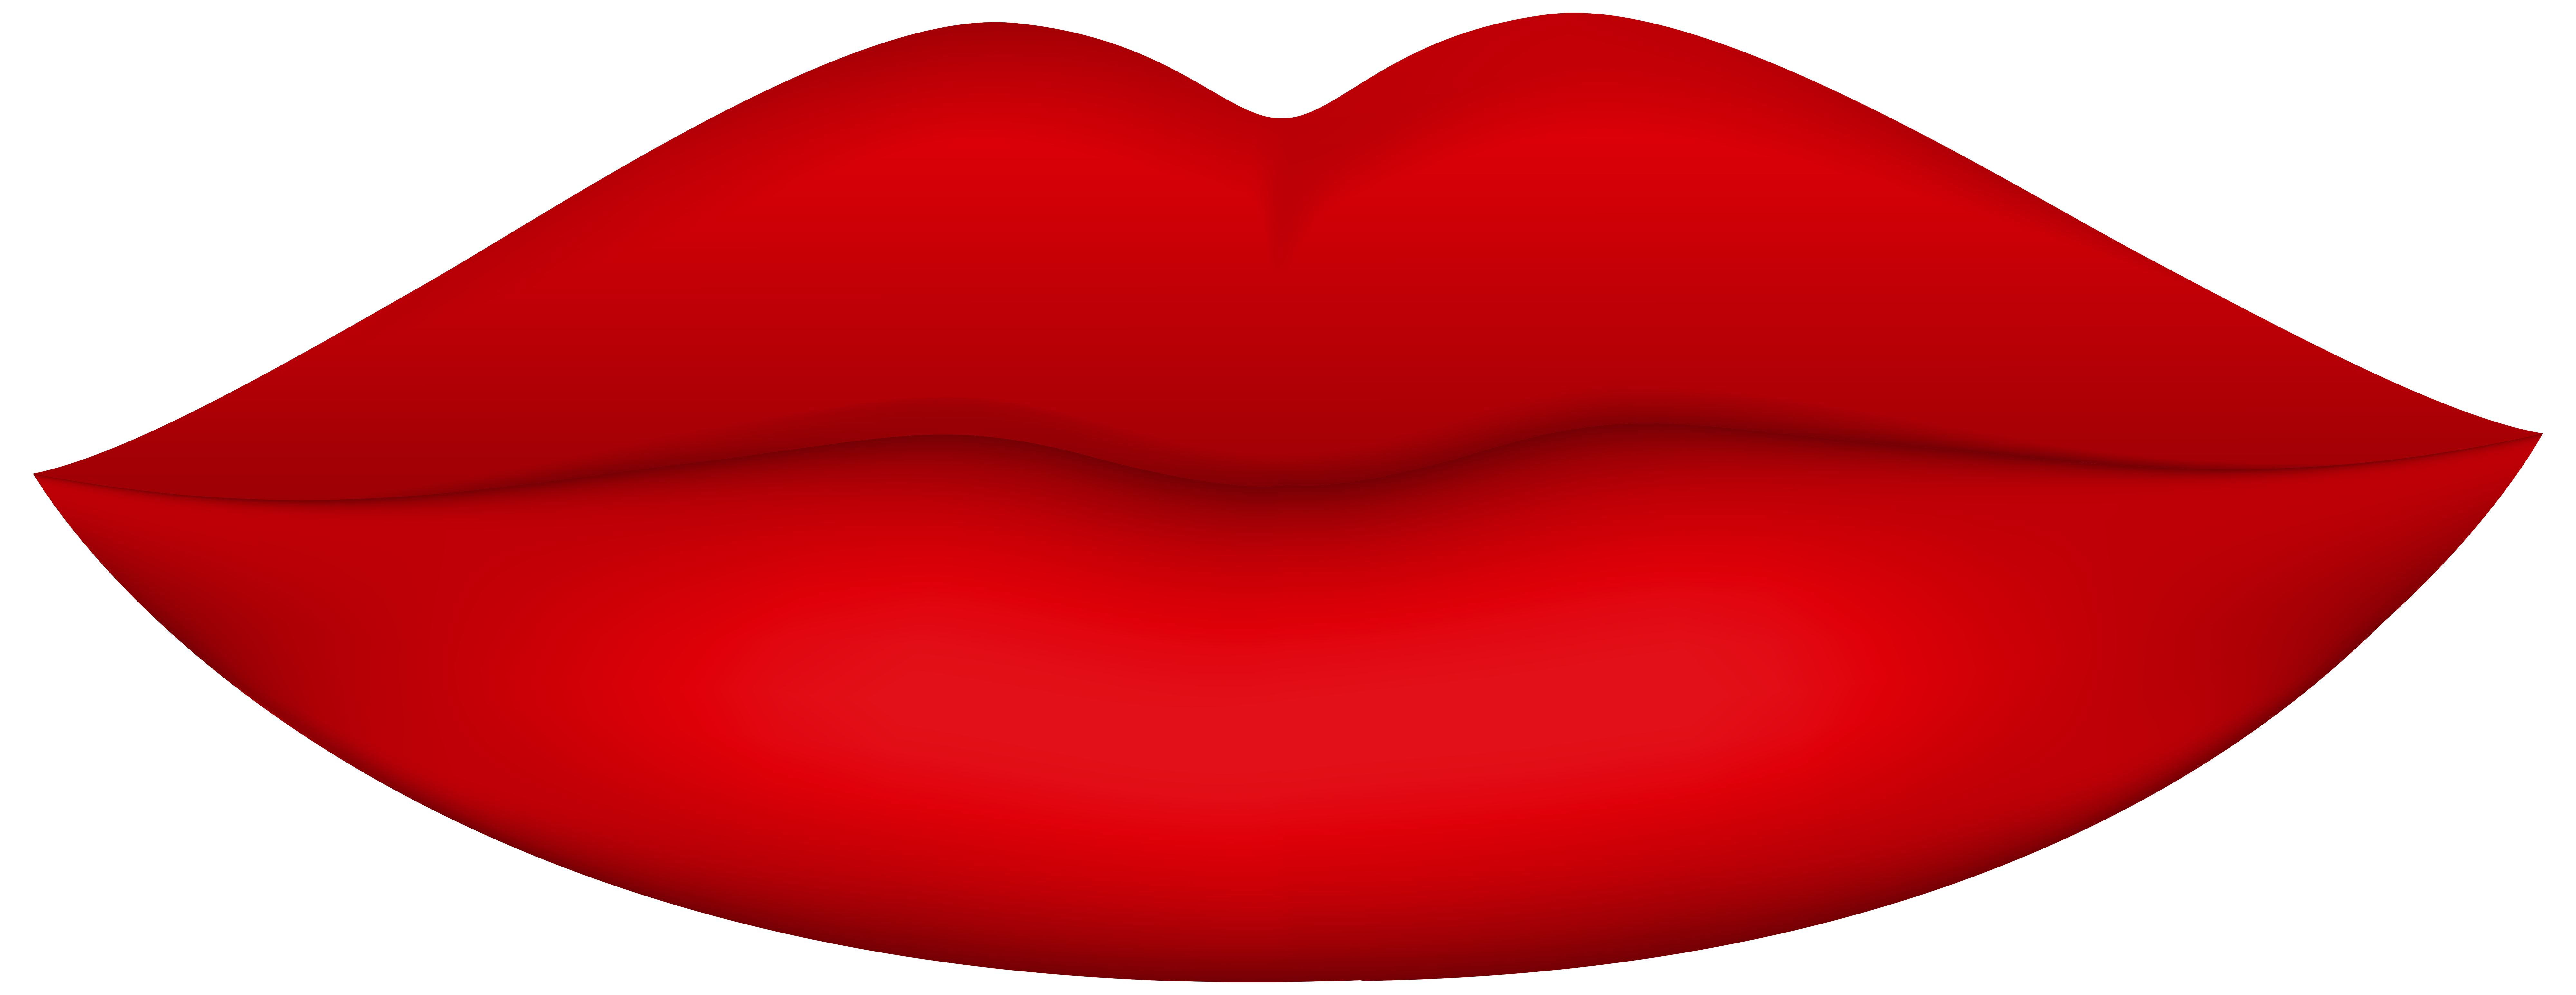 Lips red clipart